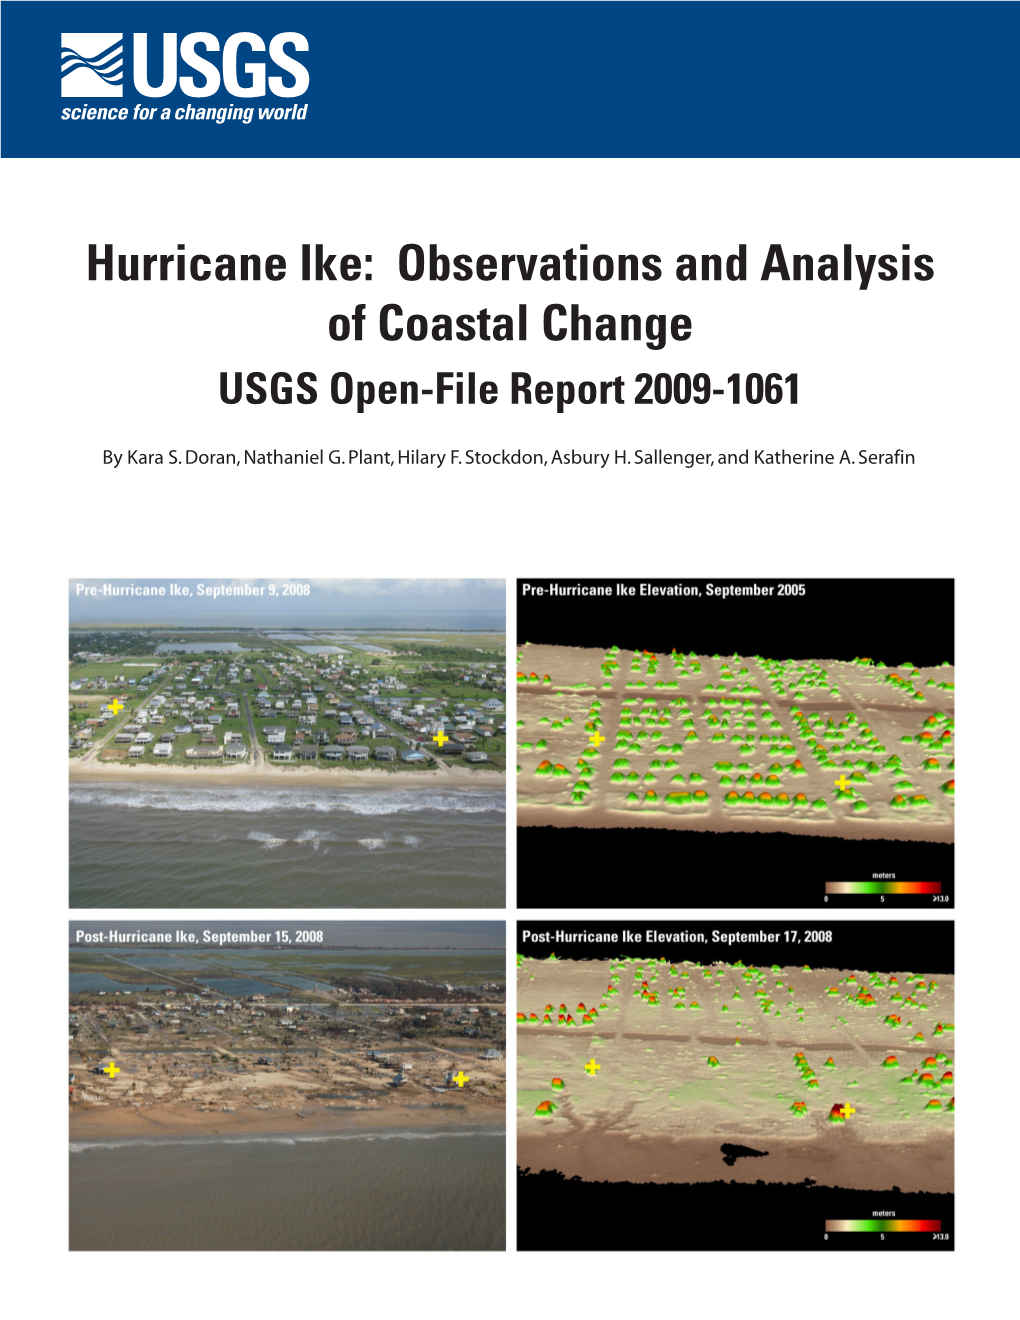 Hurricane Ike: Observations and Analysis of Coastal Change USGS Open-File Report 2009-1061